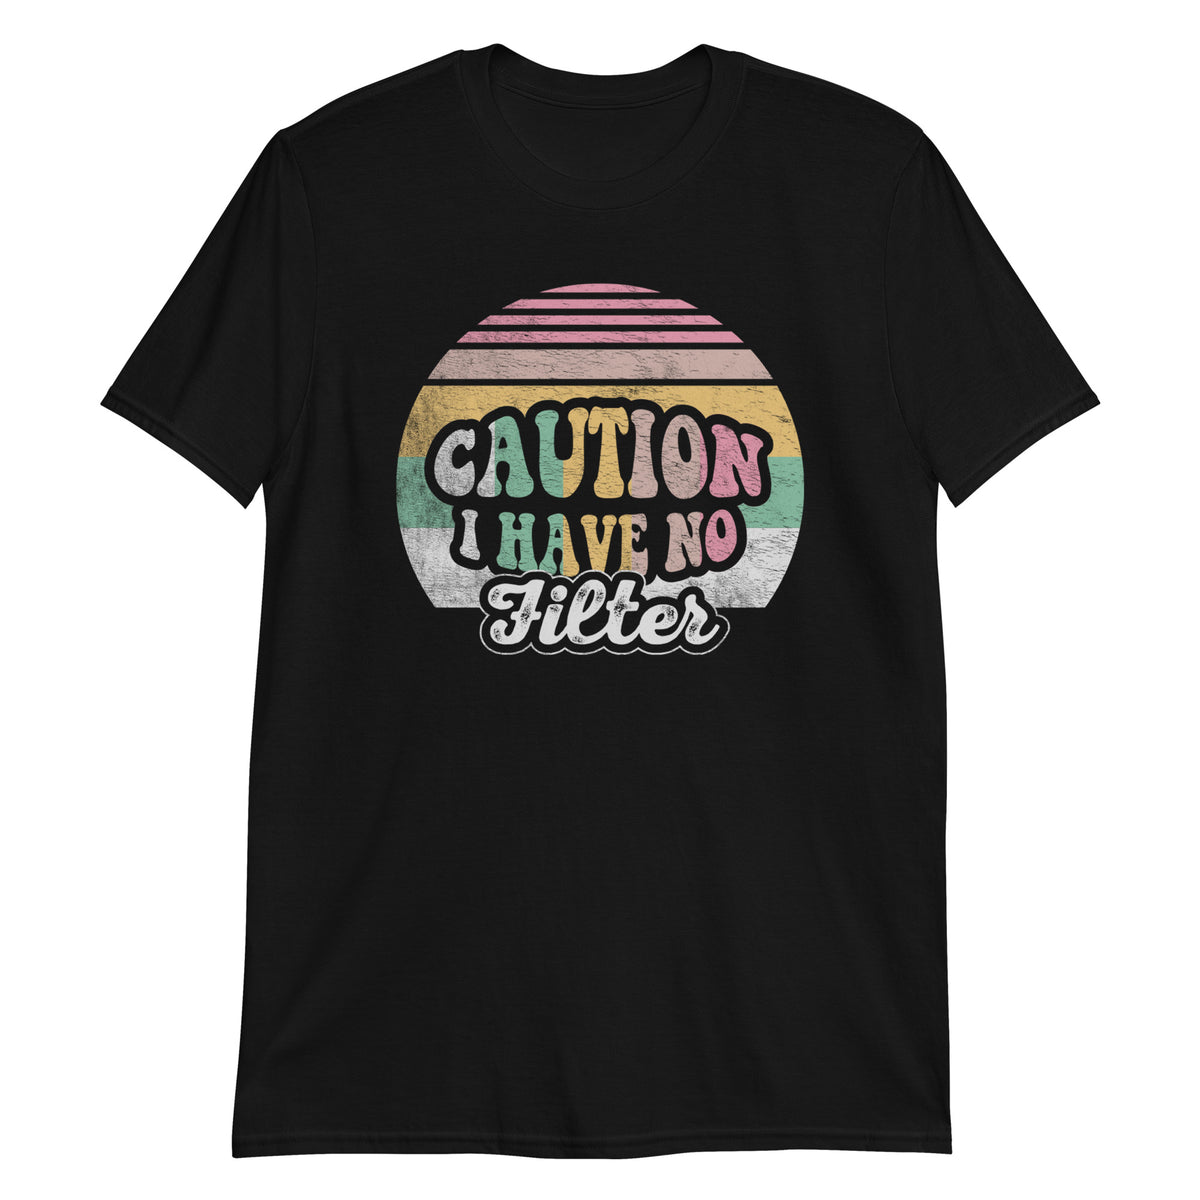 Caution I have No Filter Funny Sarcastic Humor Awesome Cute T-Shirt